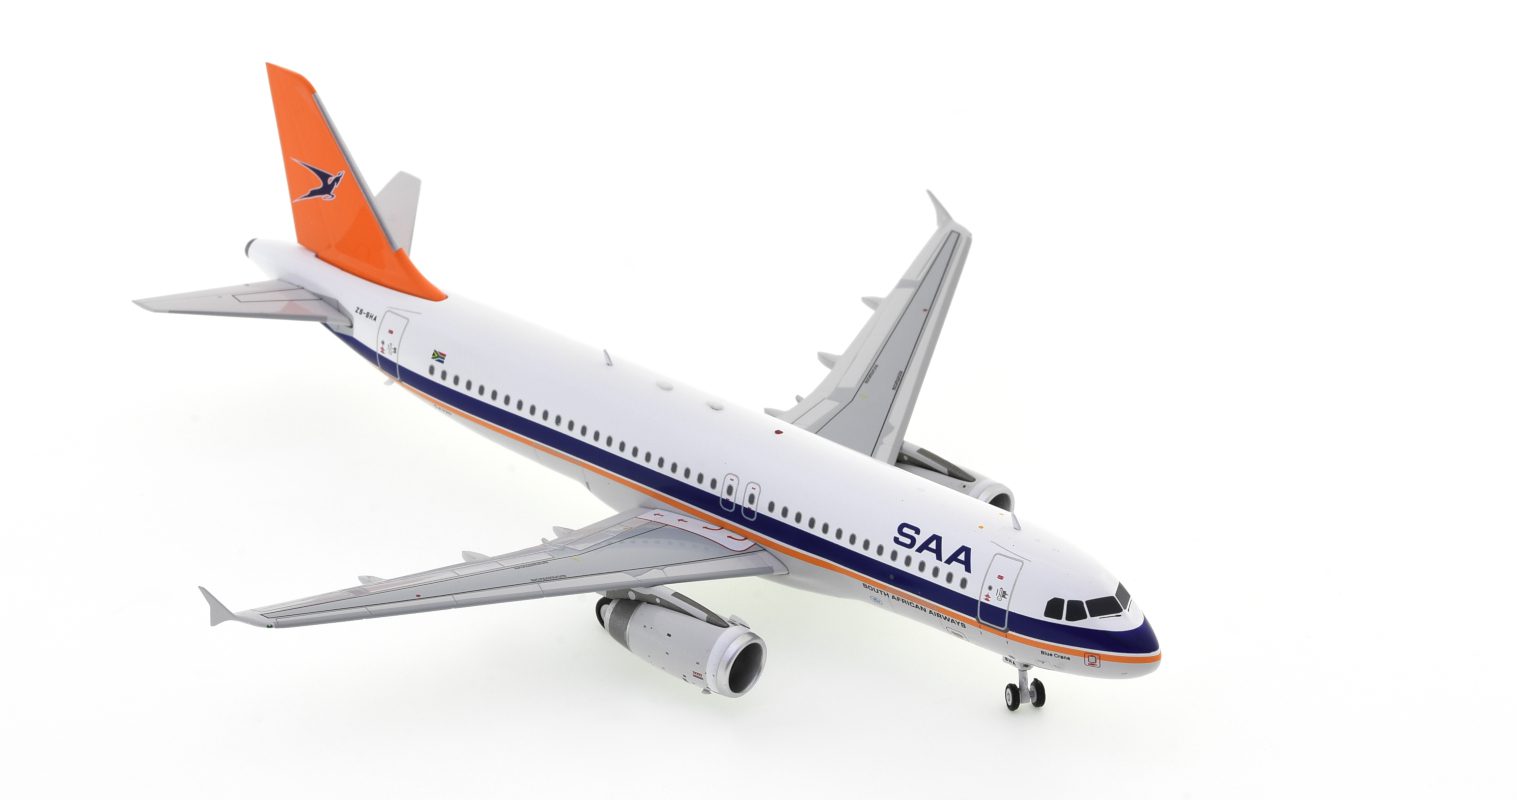 Front starboard side view of the  1/200 scale Airbus A320-200 diecast model of 